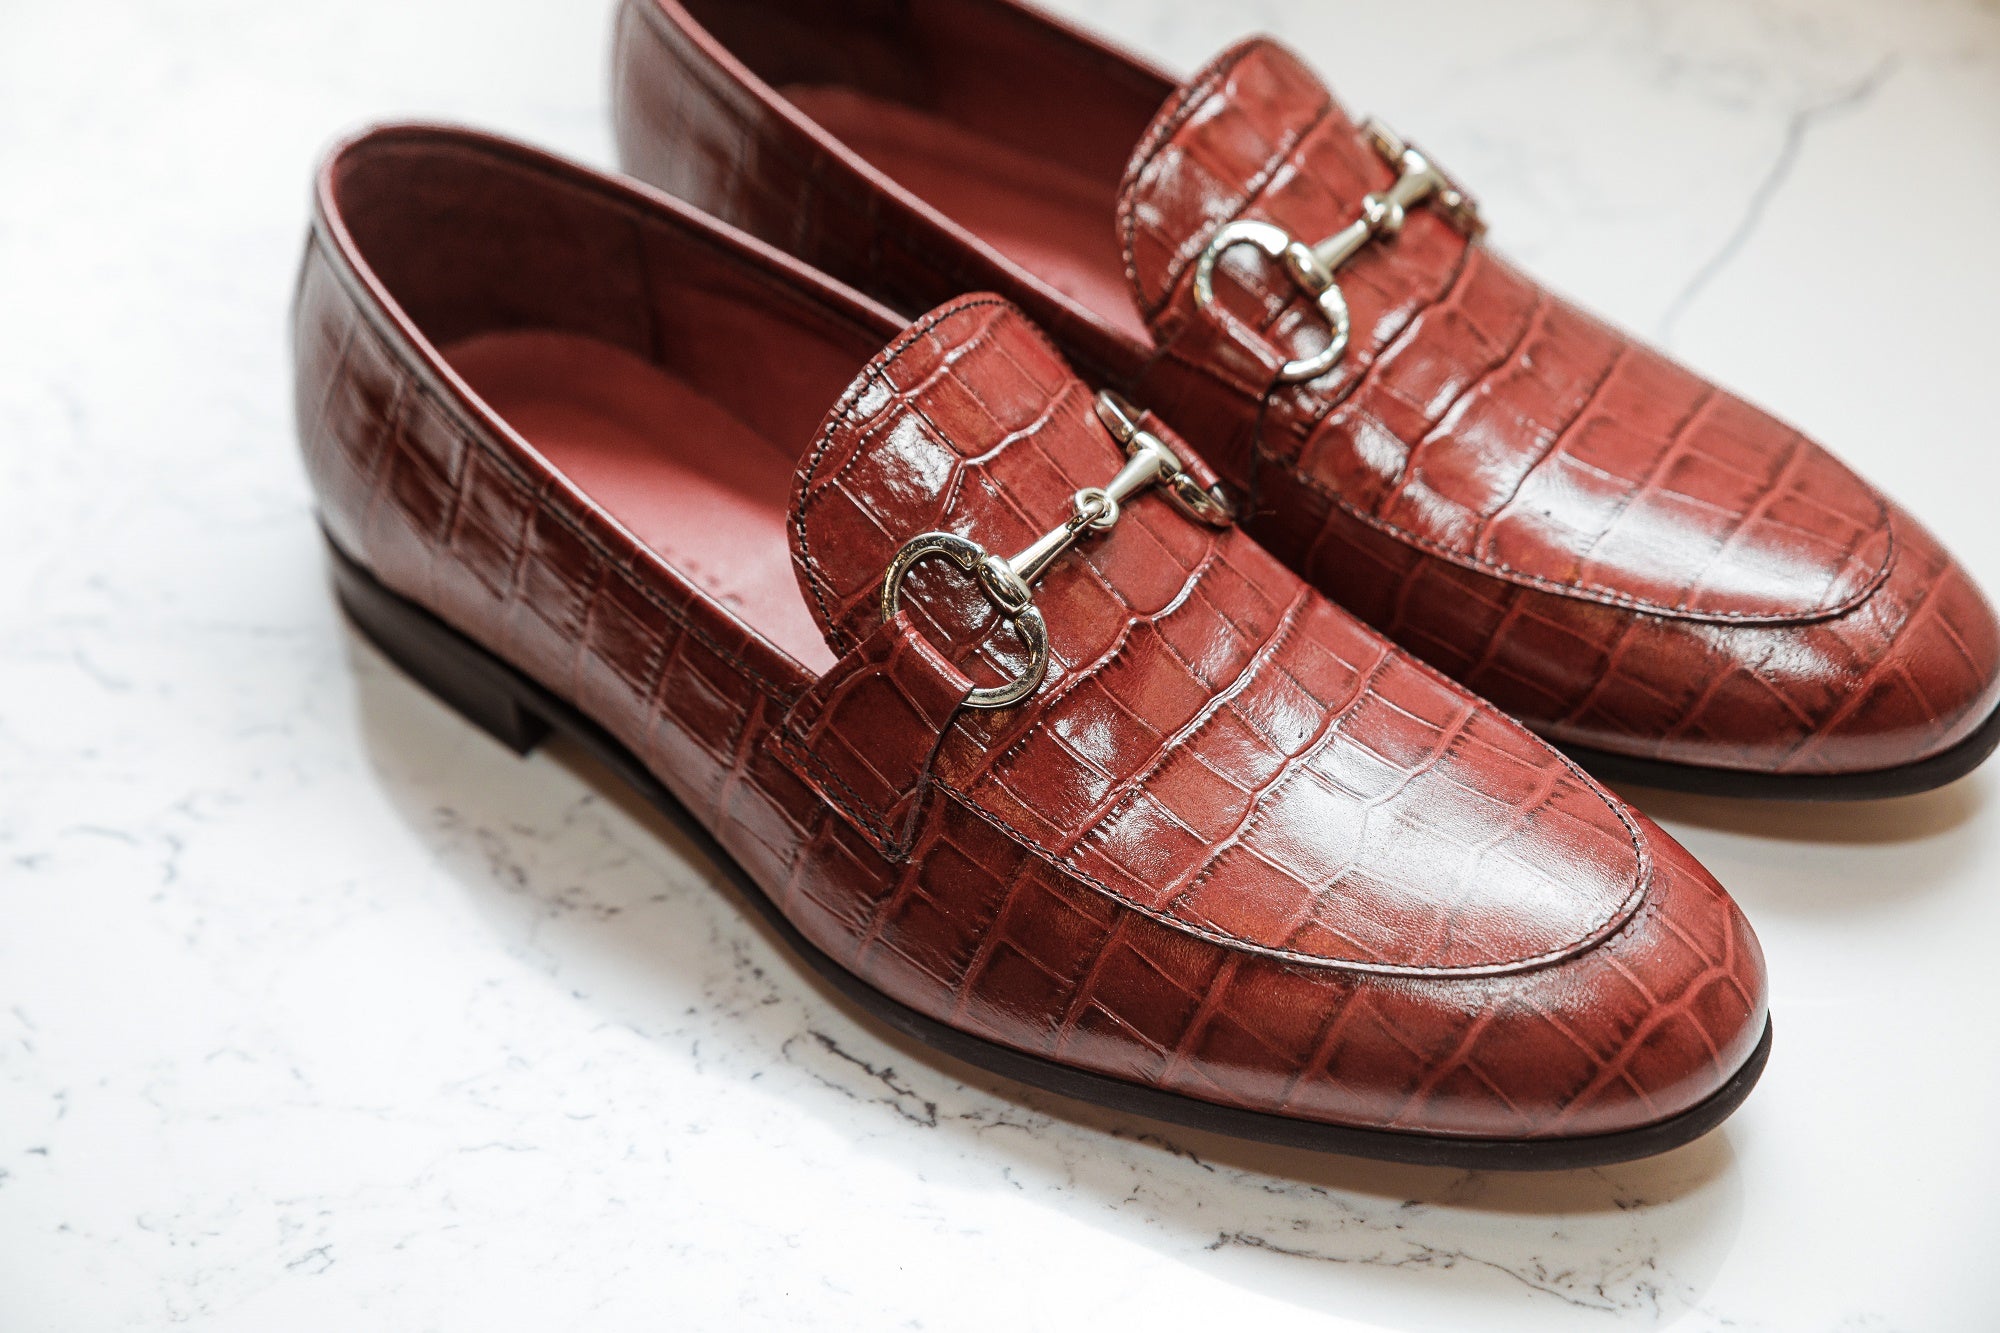 The Palermo Loafers - Loafers by Urbbana